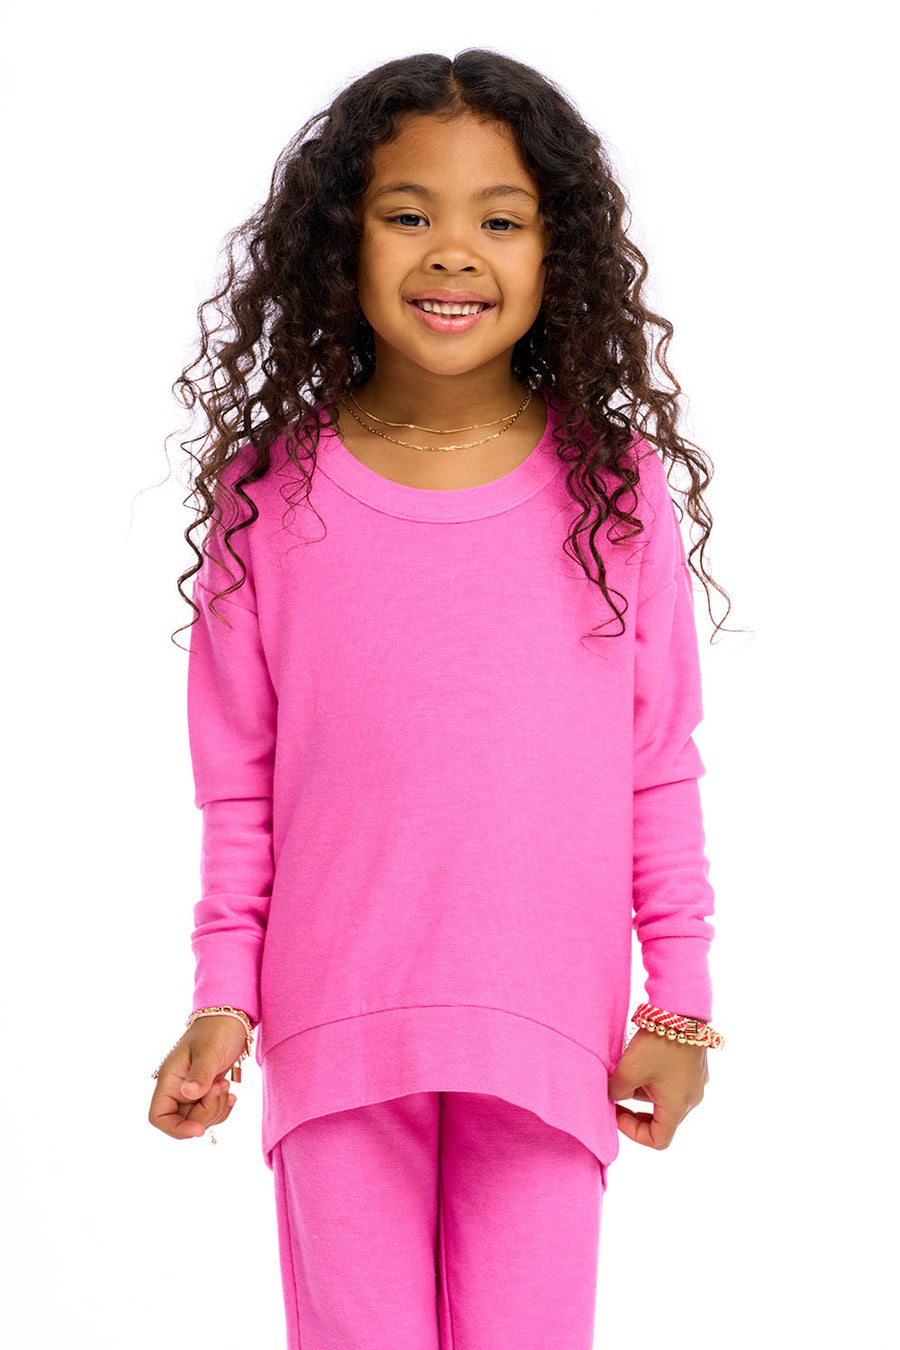 Cozy Knit Boxy Long Sleeve High Low Pullover Girls chaserbrand